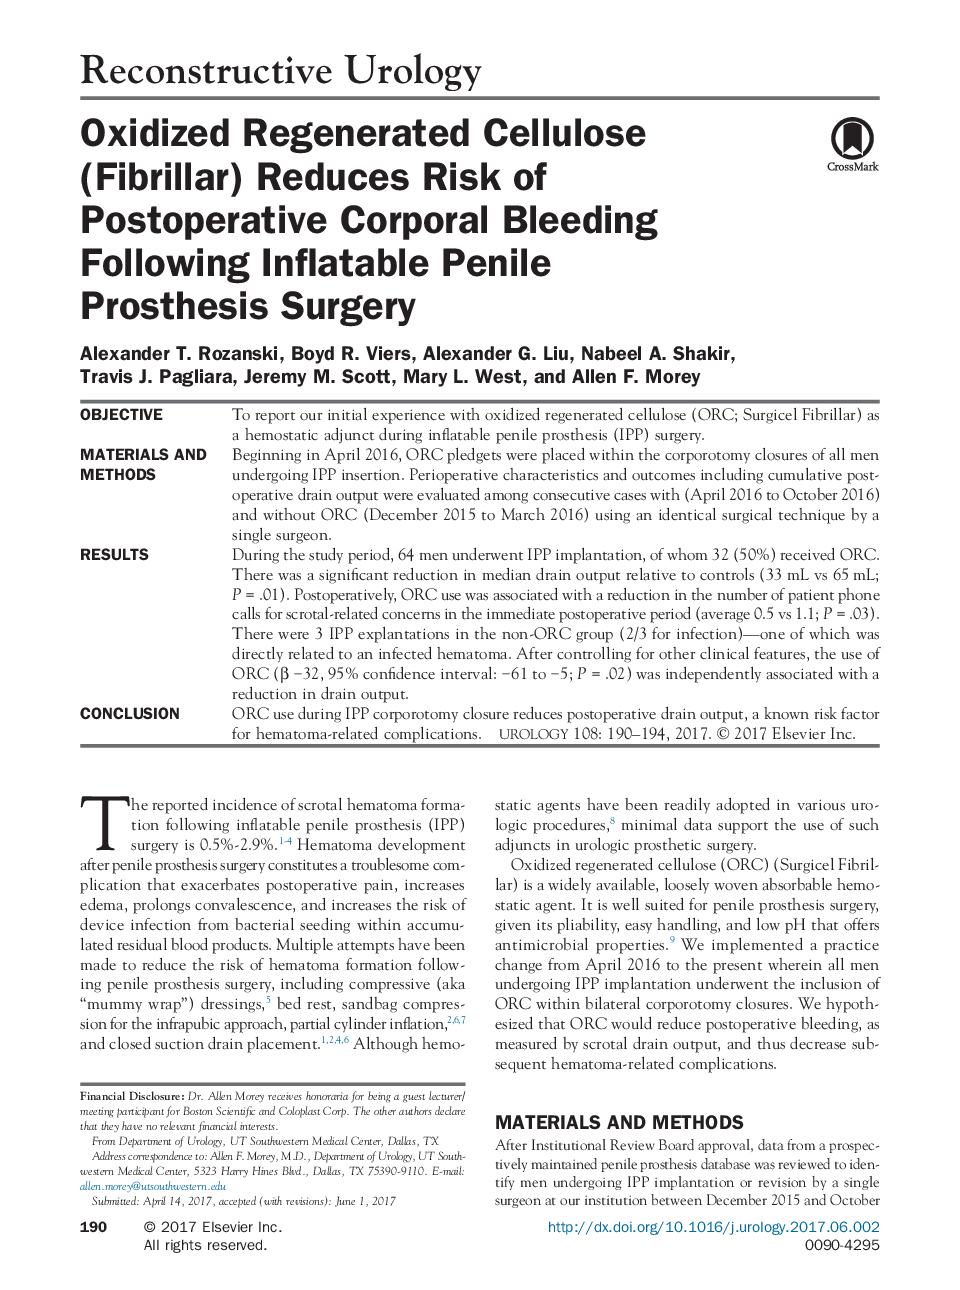 Oxidized Regenerated Cellulose (Fibrillar) Reduces Risk of Postoperative Corporal Bleeding Following Inflatable Penile Prosthesis Surgery